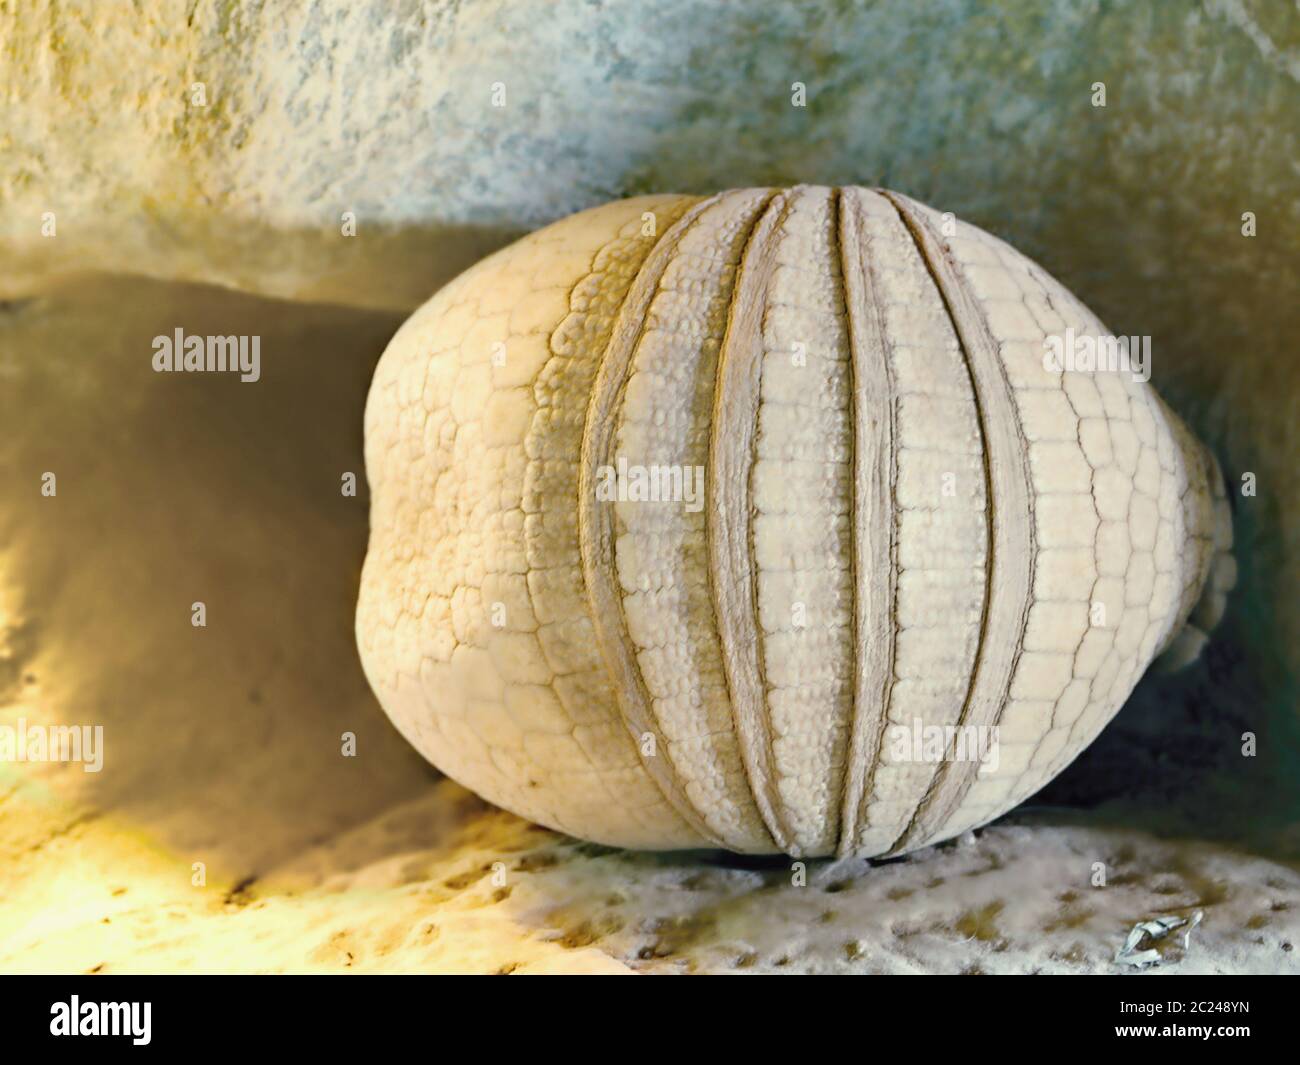 An armadillo curled into a ball lies under a rock in the sun. It looks like a big ball or a decorated melon closeup frontal. Stock Photo